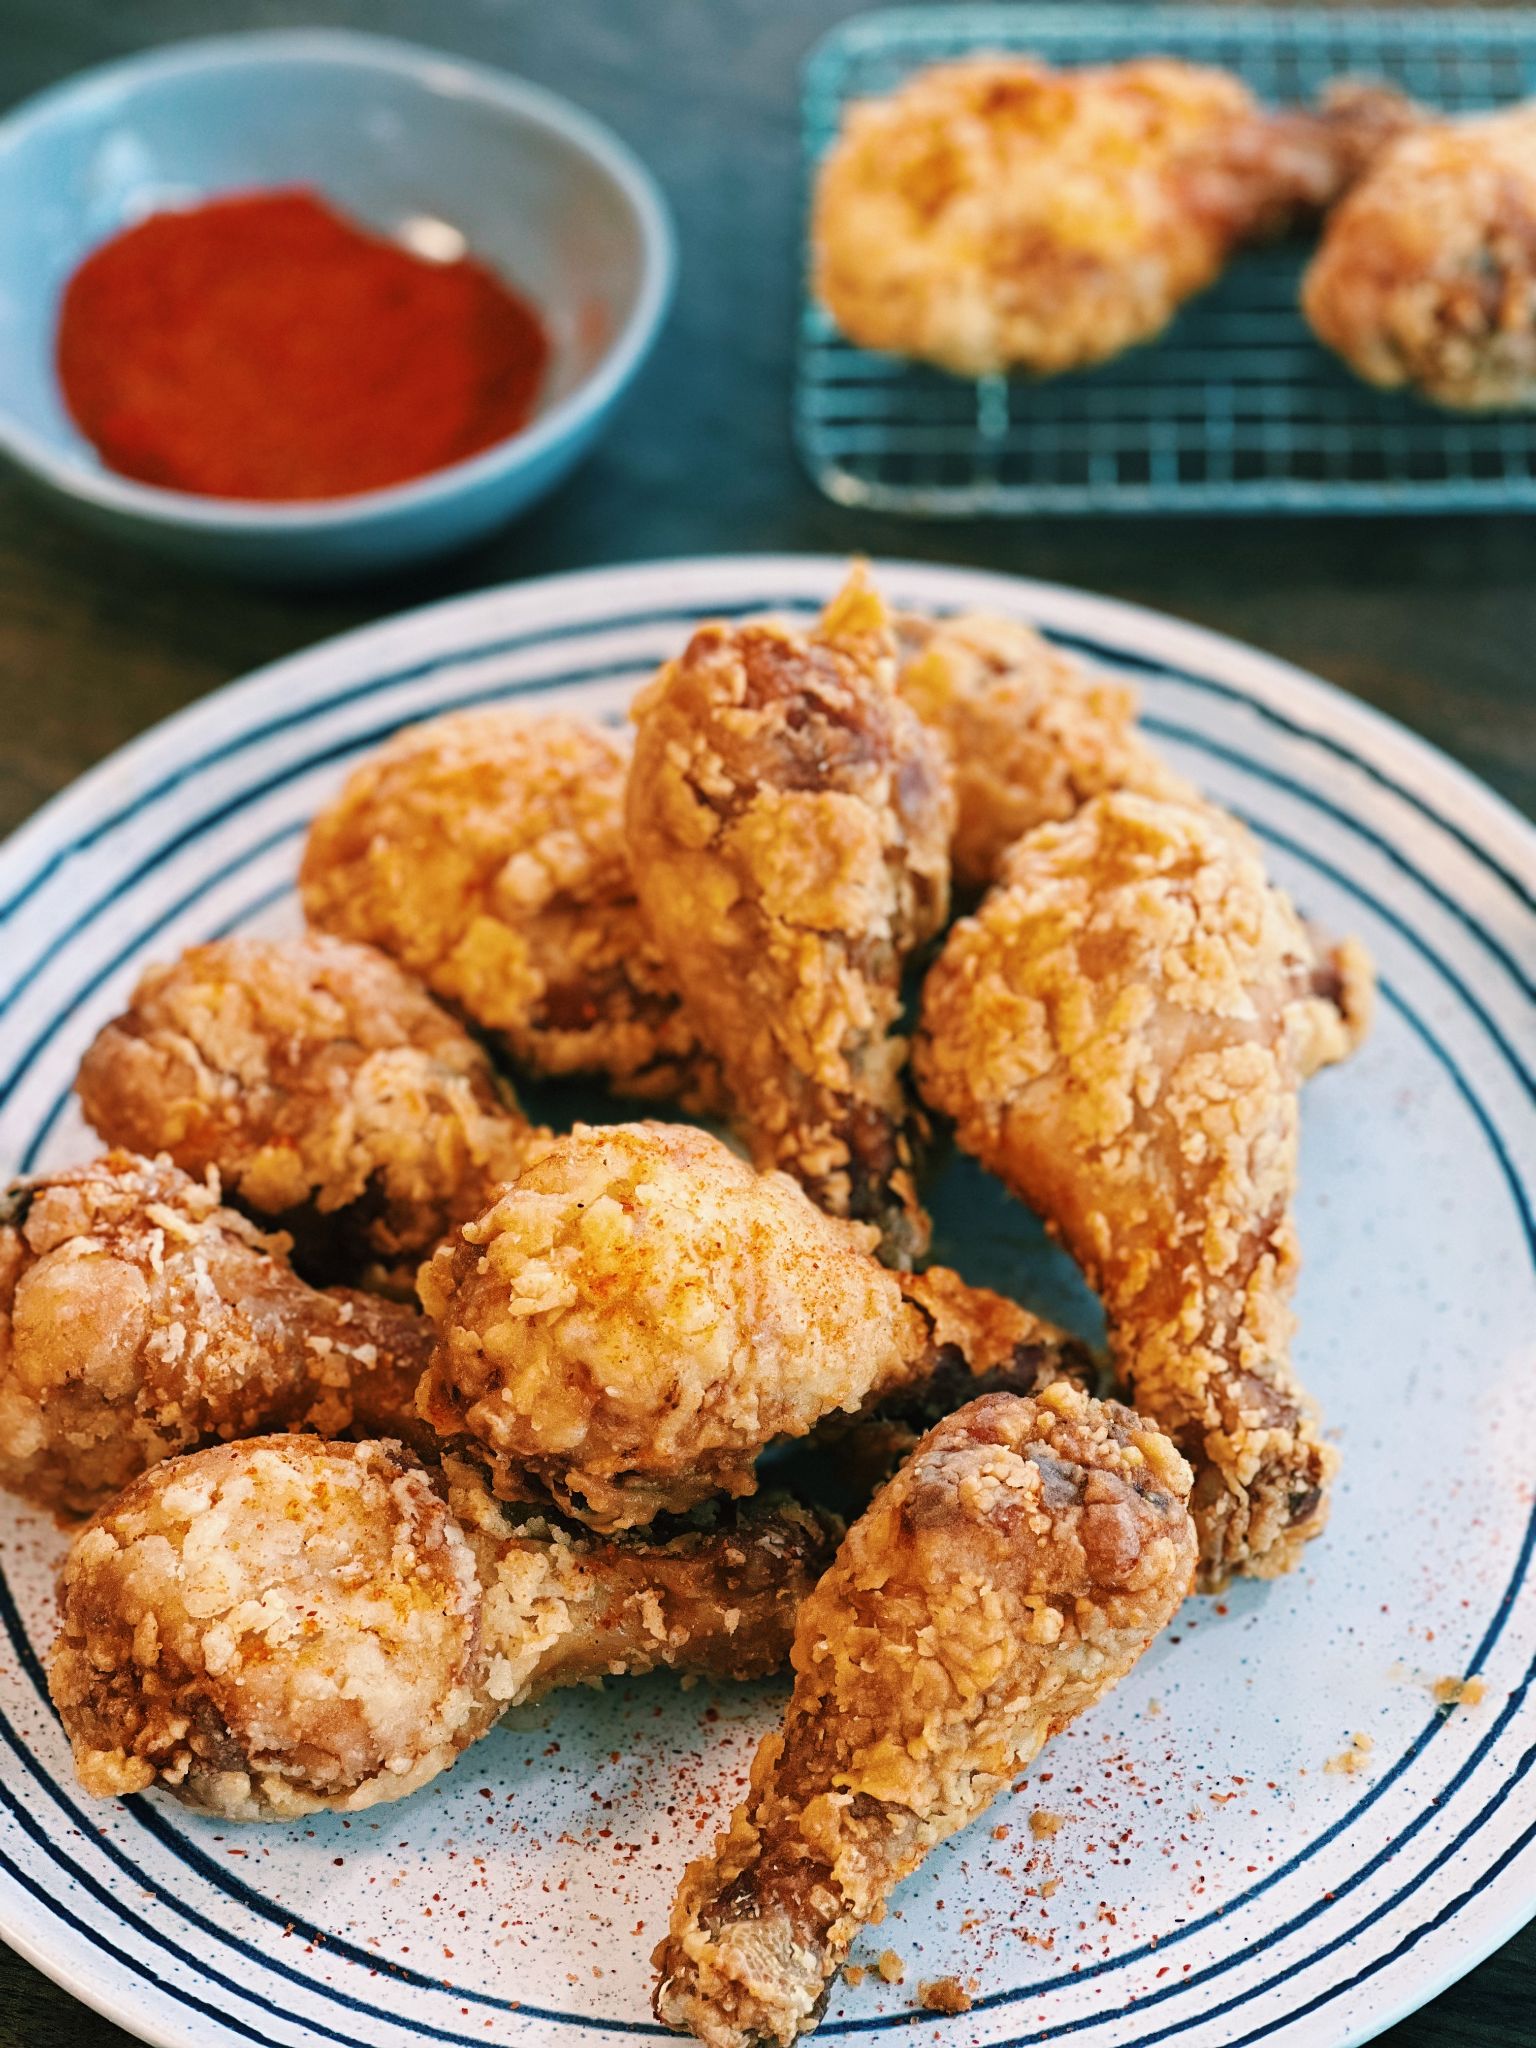 Spicy Fried Chicken - Taiwanese Nightmarket Style